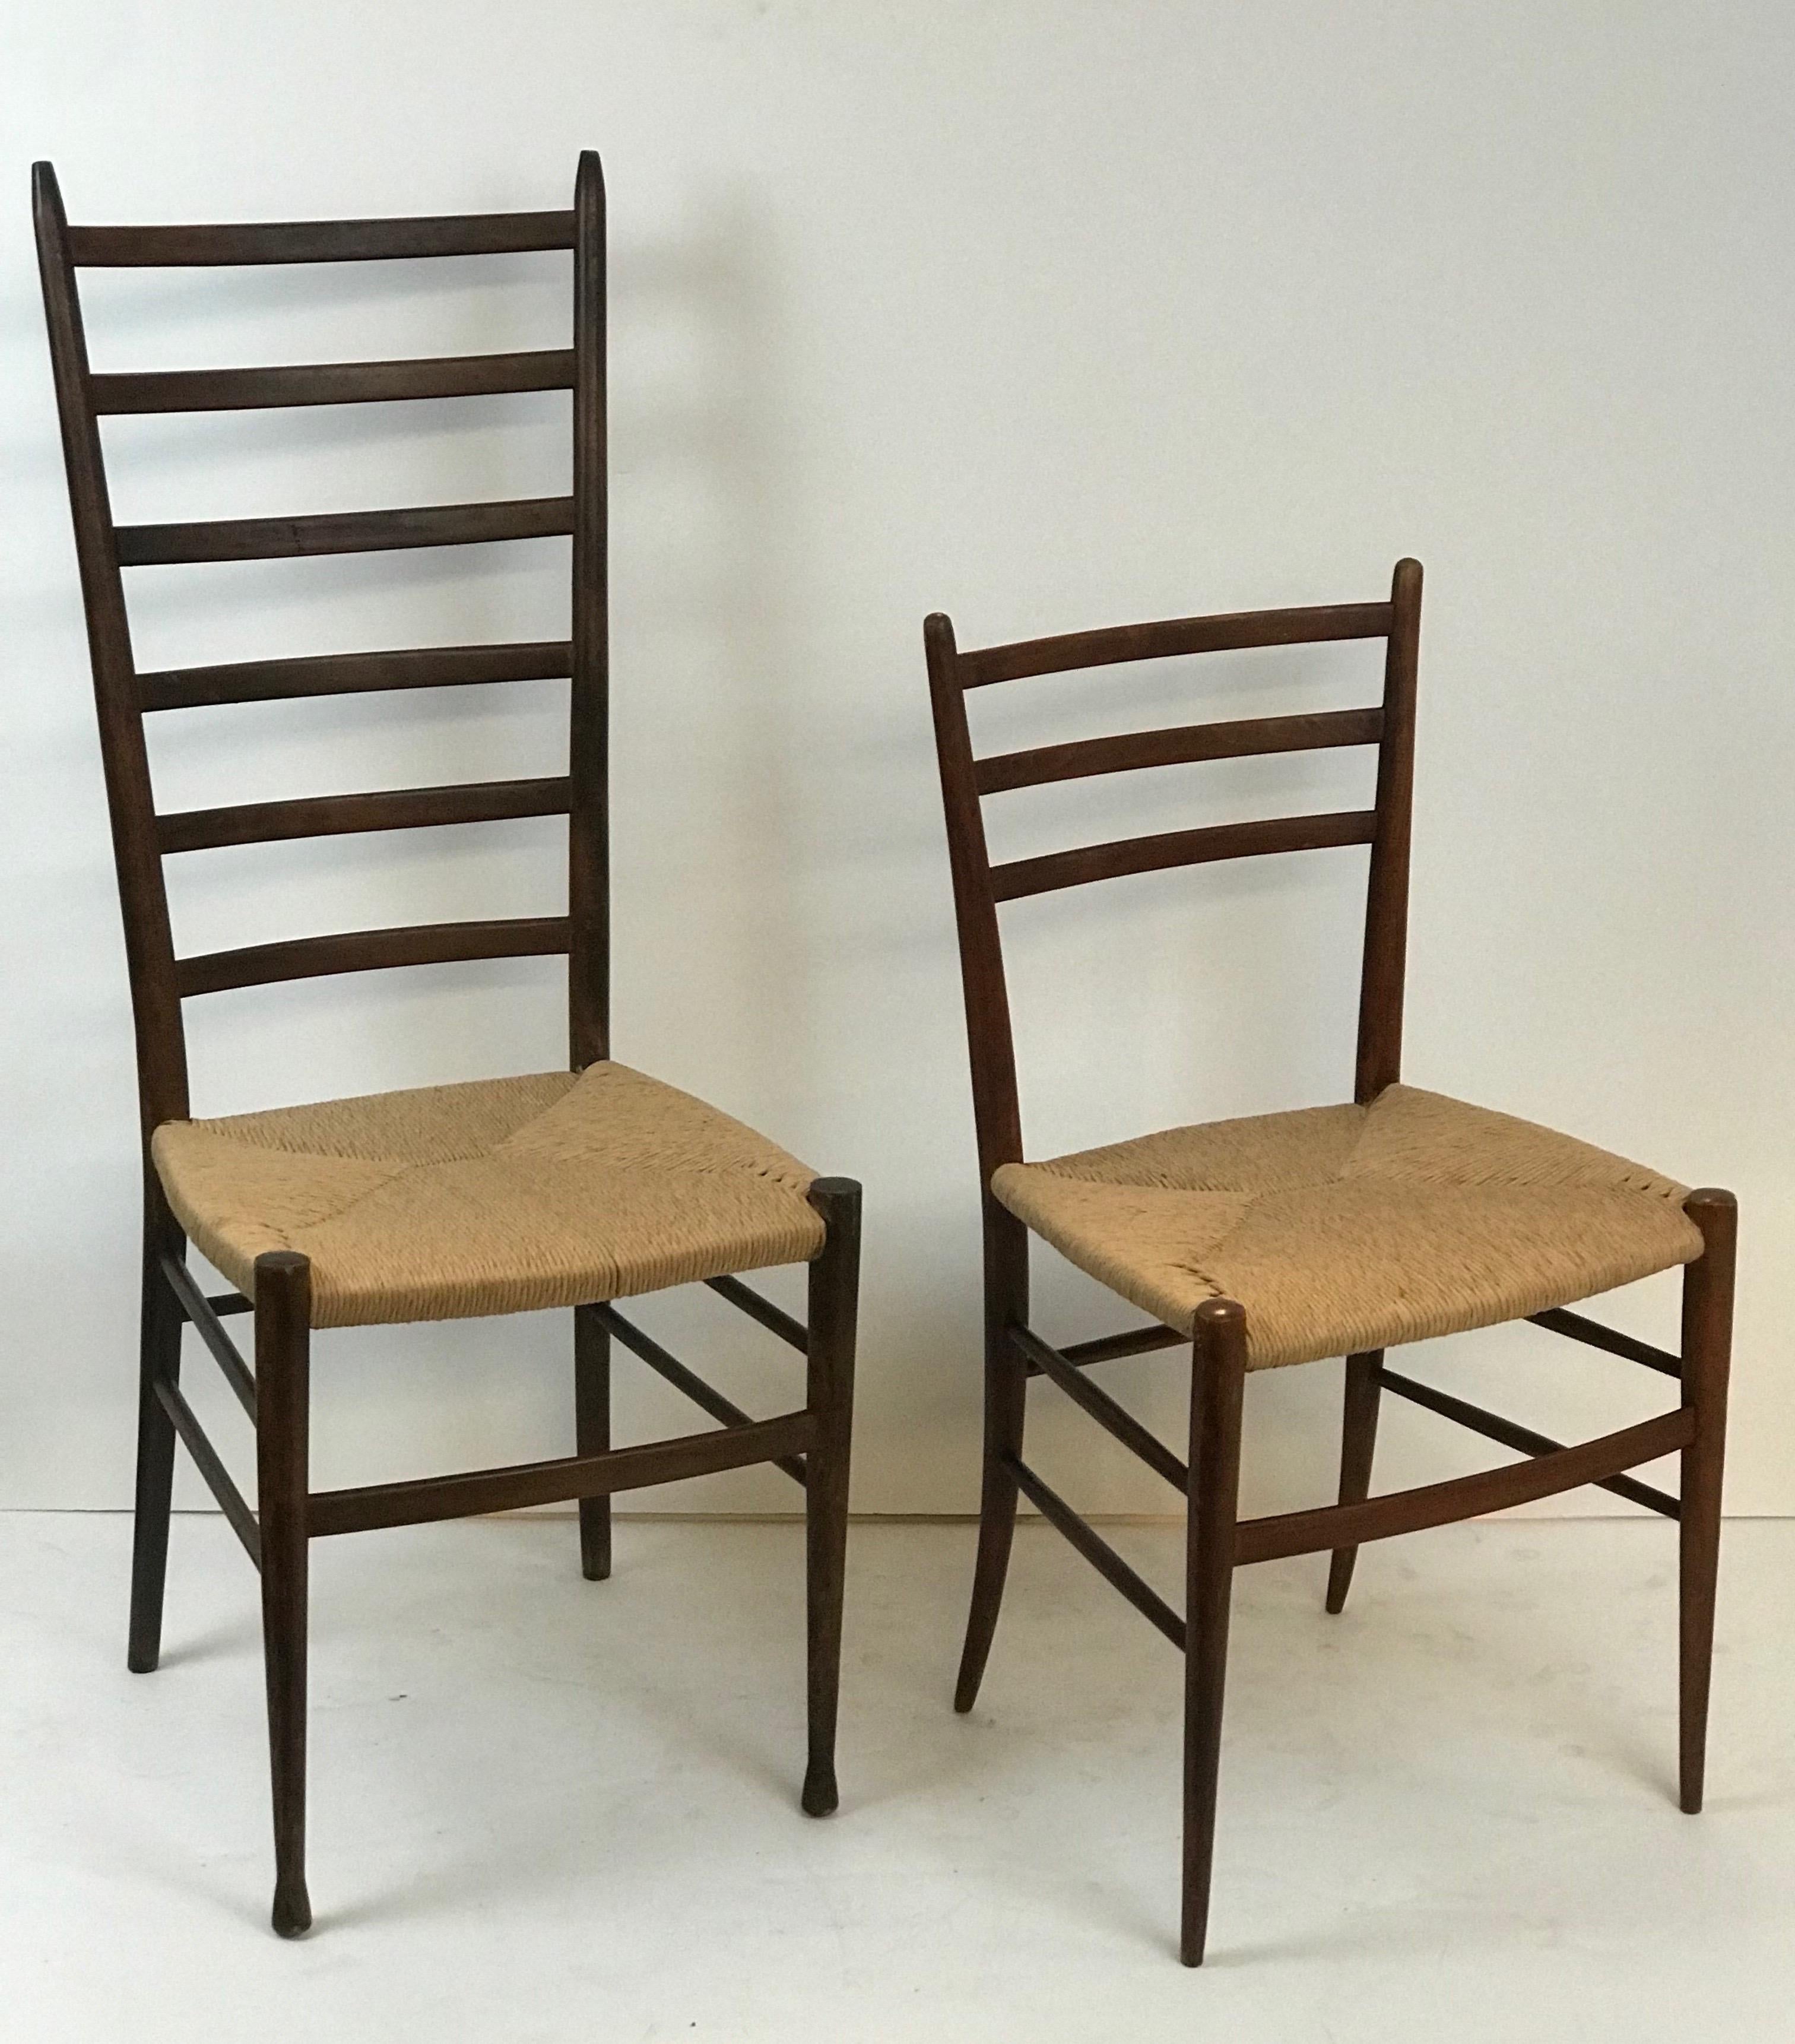 A matched un-matching 1950's his and hers pair of traditional Spinetto, Italian ladder back chairs made by Chiavari with new hemp rope woven seats in medium walnut finish. Both chairs were recently redone and are in excellent structural and cosmetic